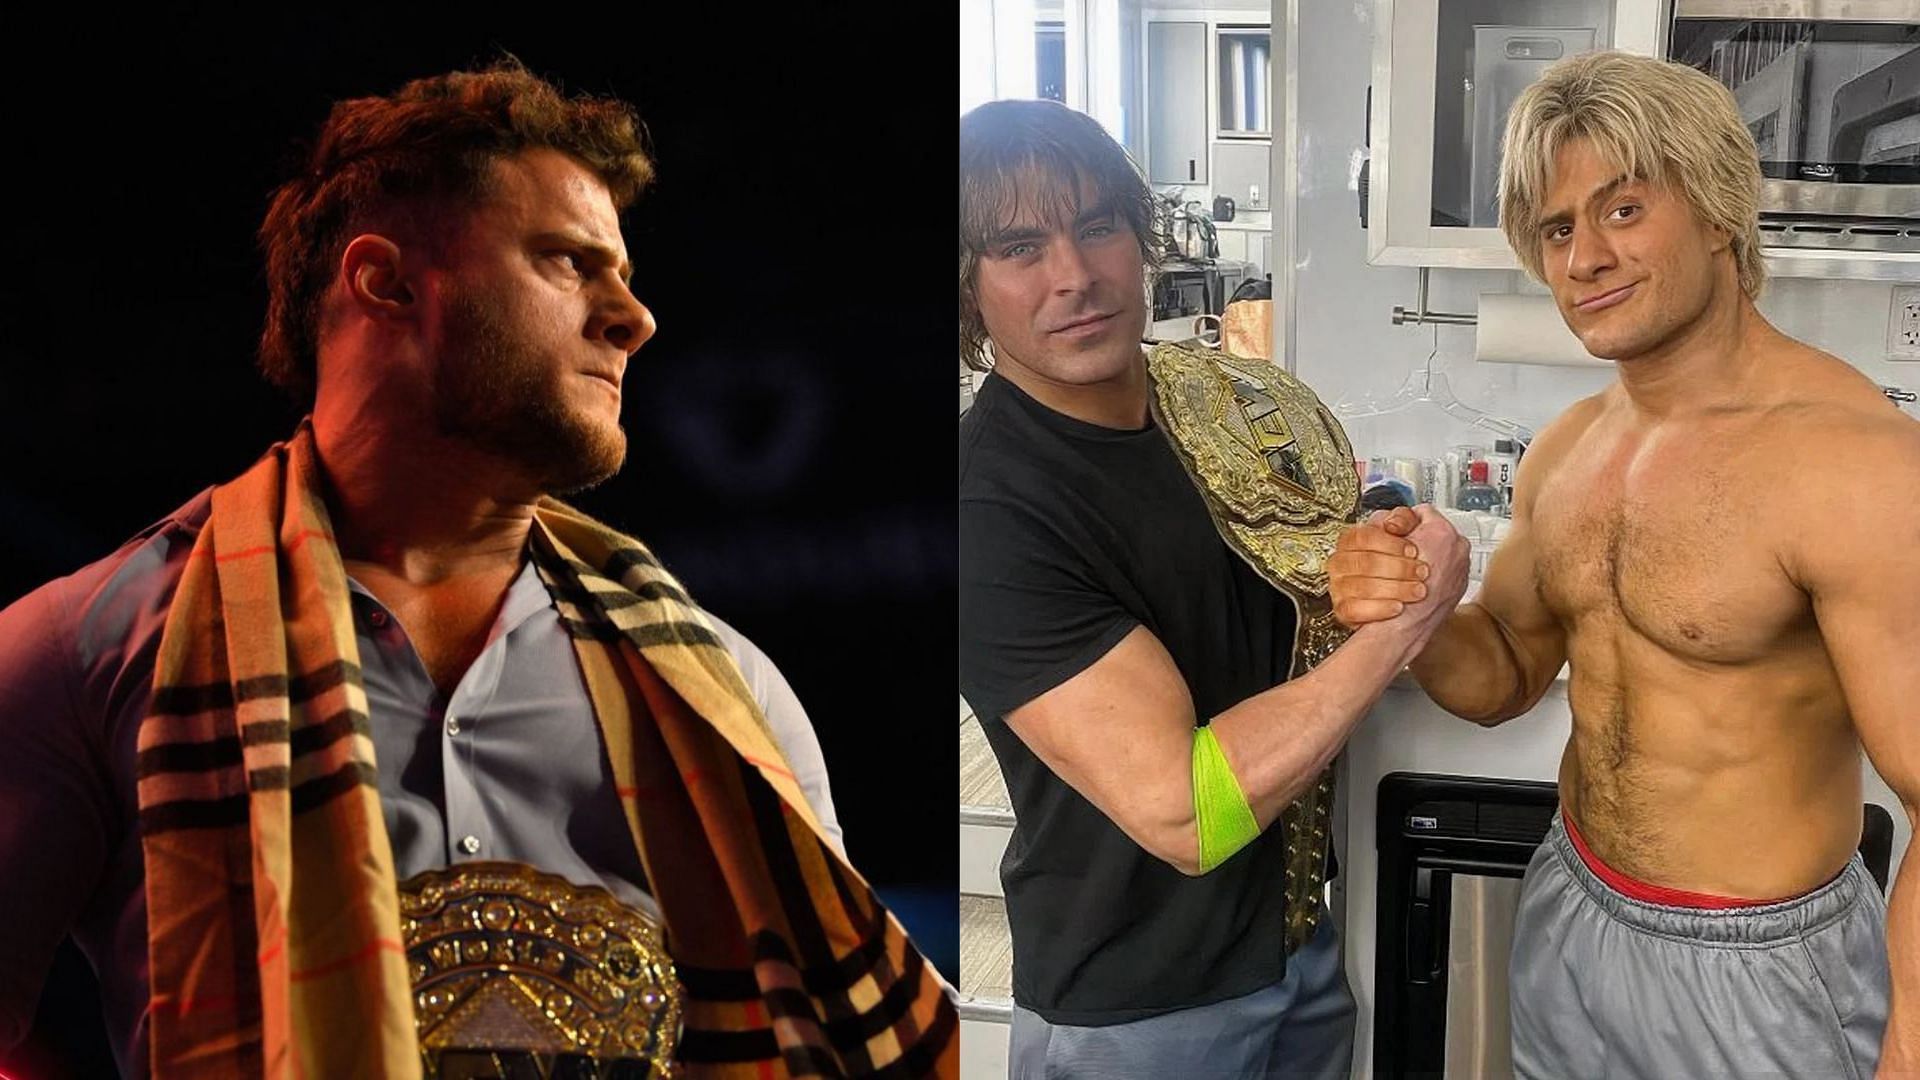 MJF plays the role of Lance Von Erich in The Iron Claw